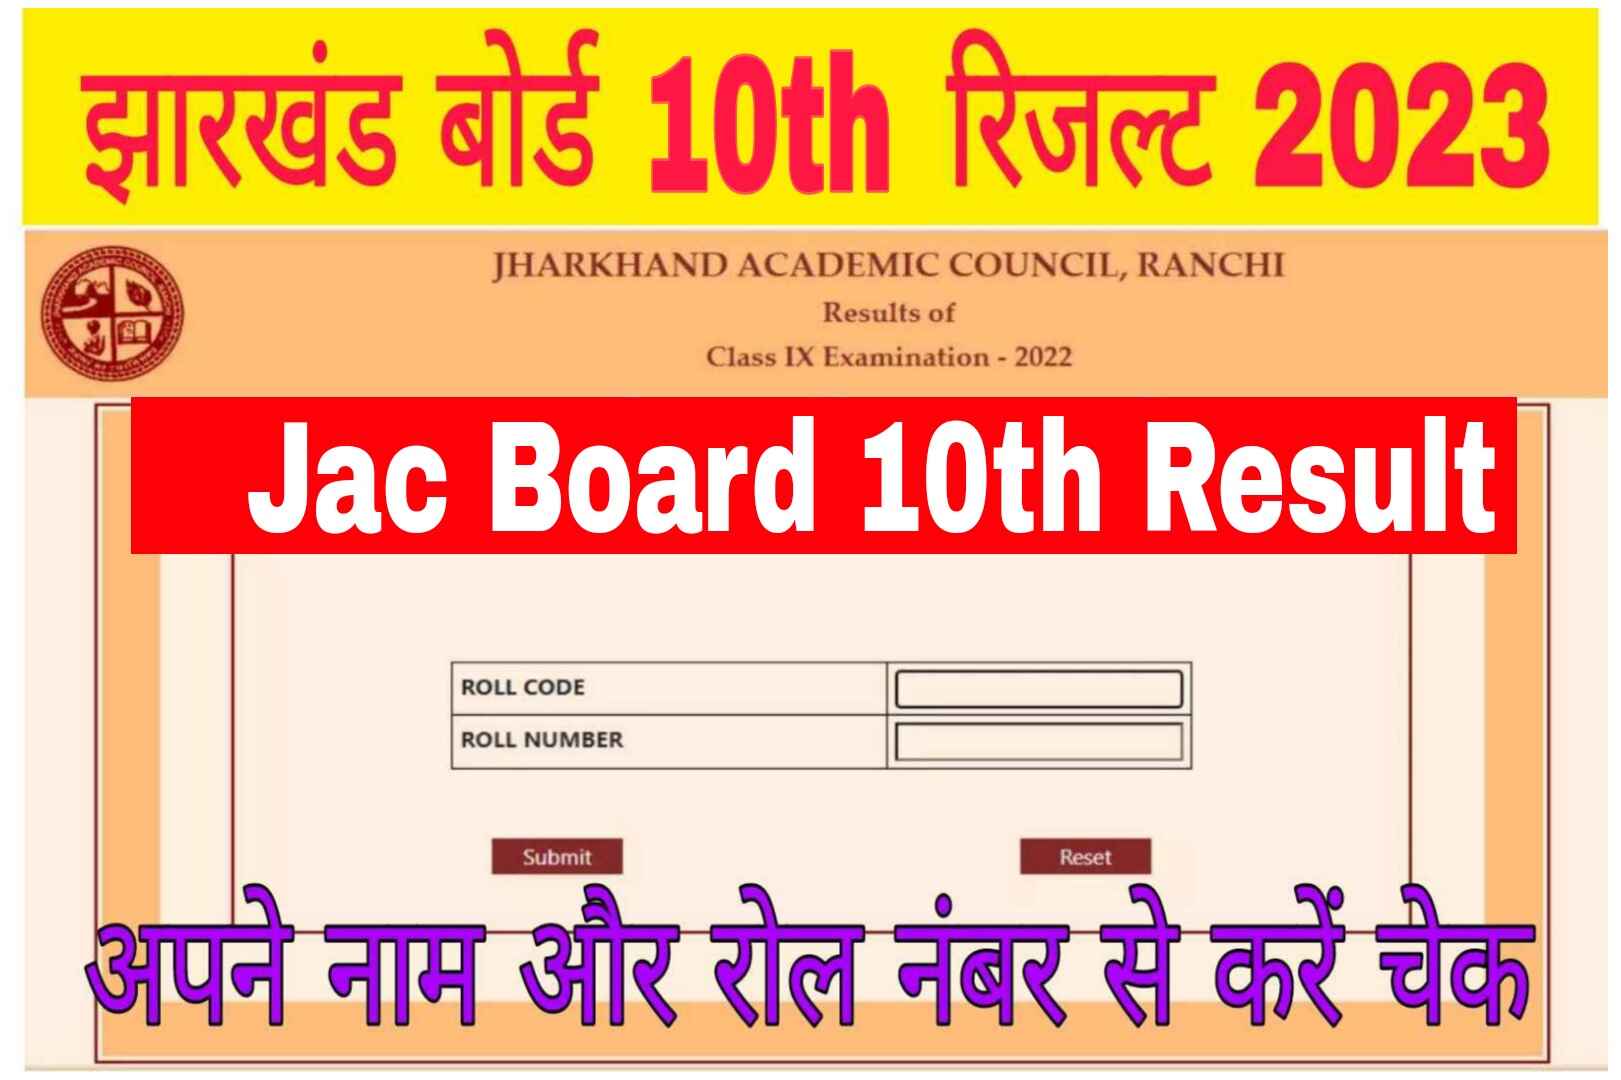 Jac Board 10th Result 2023 Name Wise